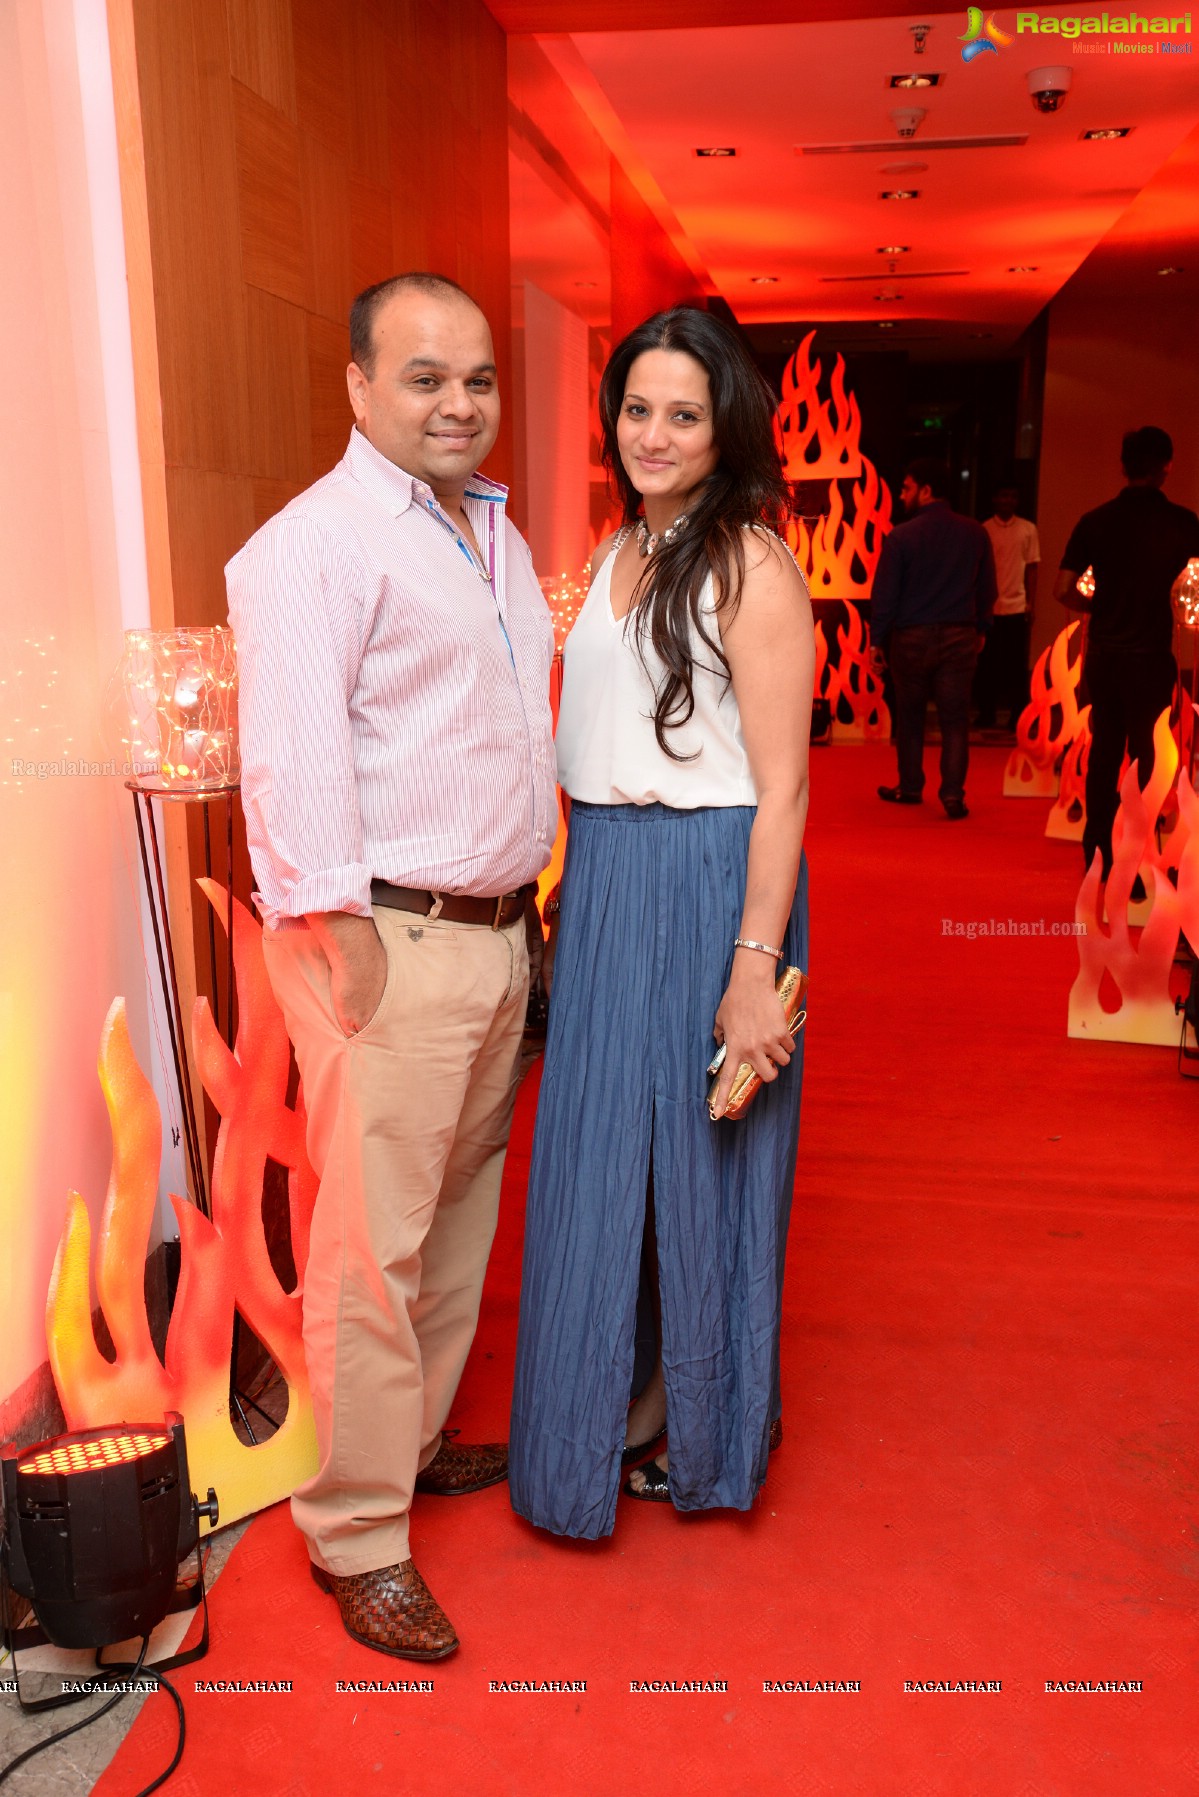 The Round Table India Evening Party at Marigold, Hyderabad